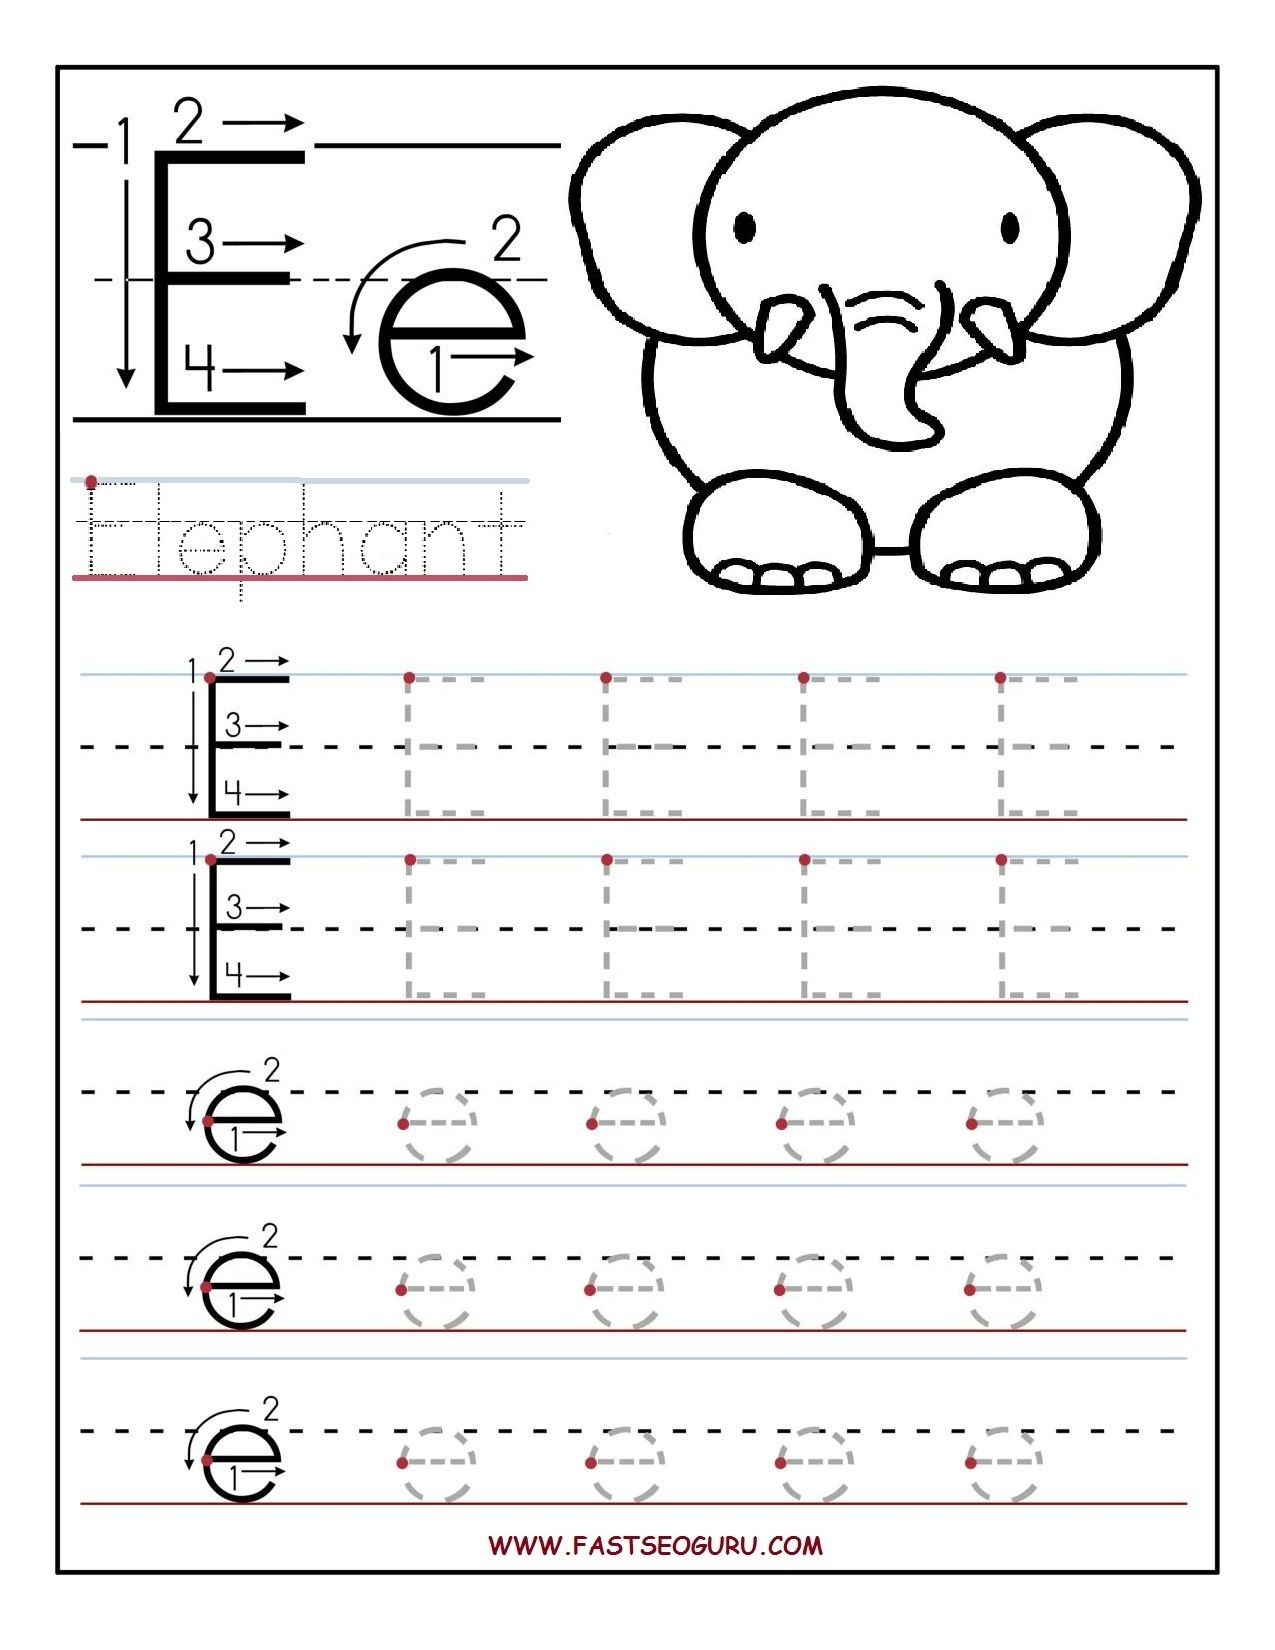 Printable Letter E Tracing Worksheets For Preschool in Letter E Tracing Worksheets Pdf